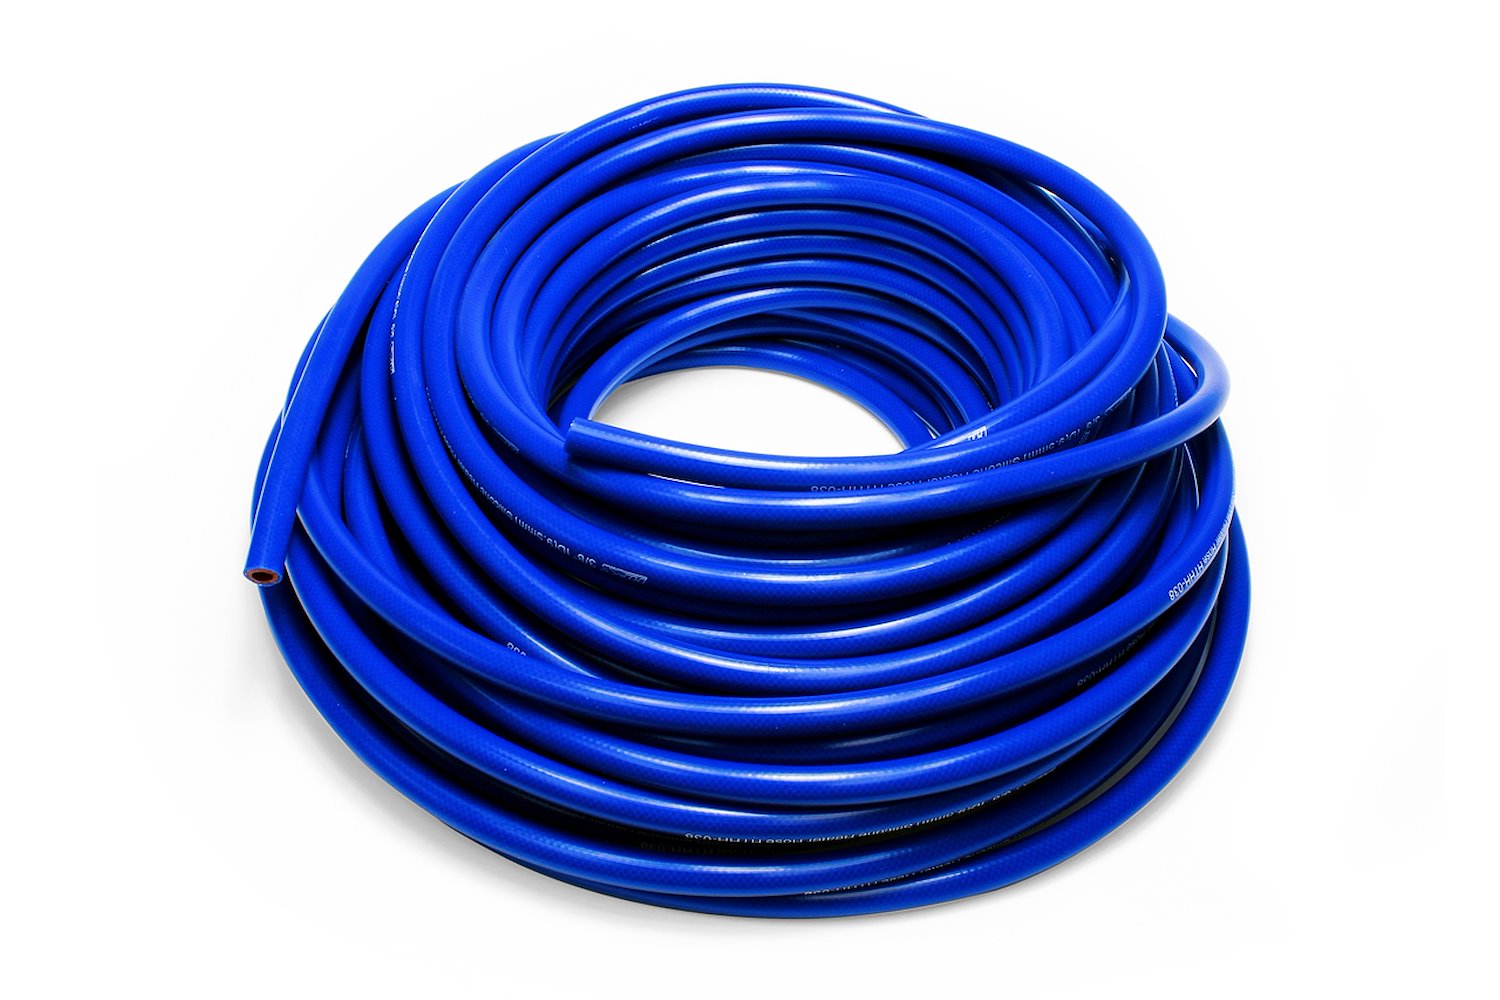 HTHH-050-BLUEx50 Silicone Heater Hose Tubing, High-Temp 1-Ply Reinforced, 1/2 in. ID, 50 ft. Roll, Blue